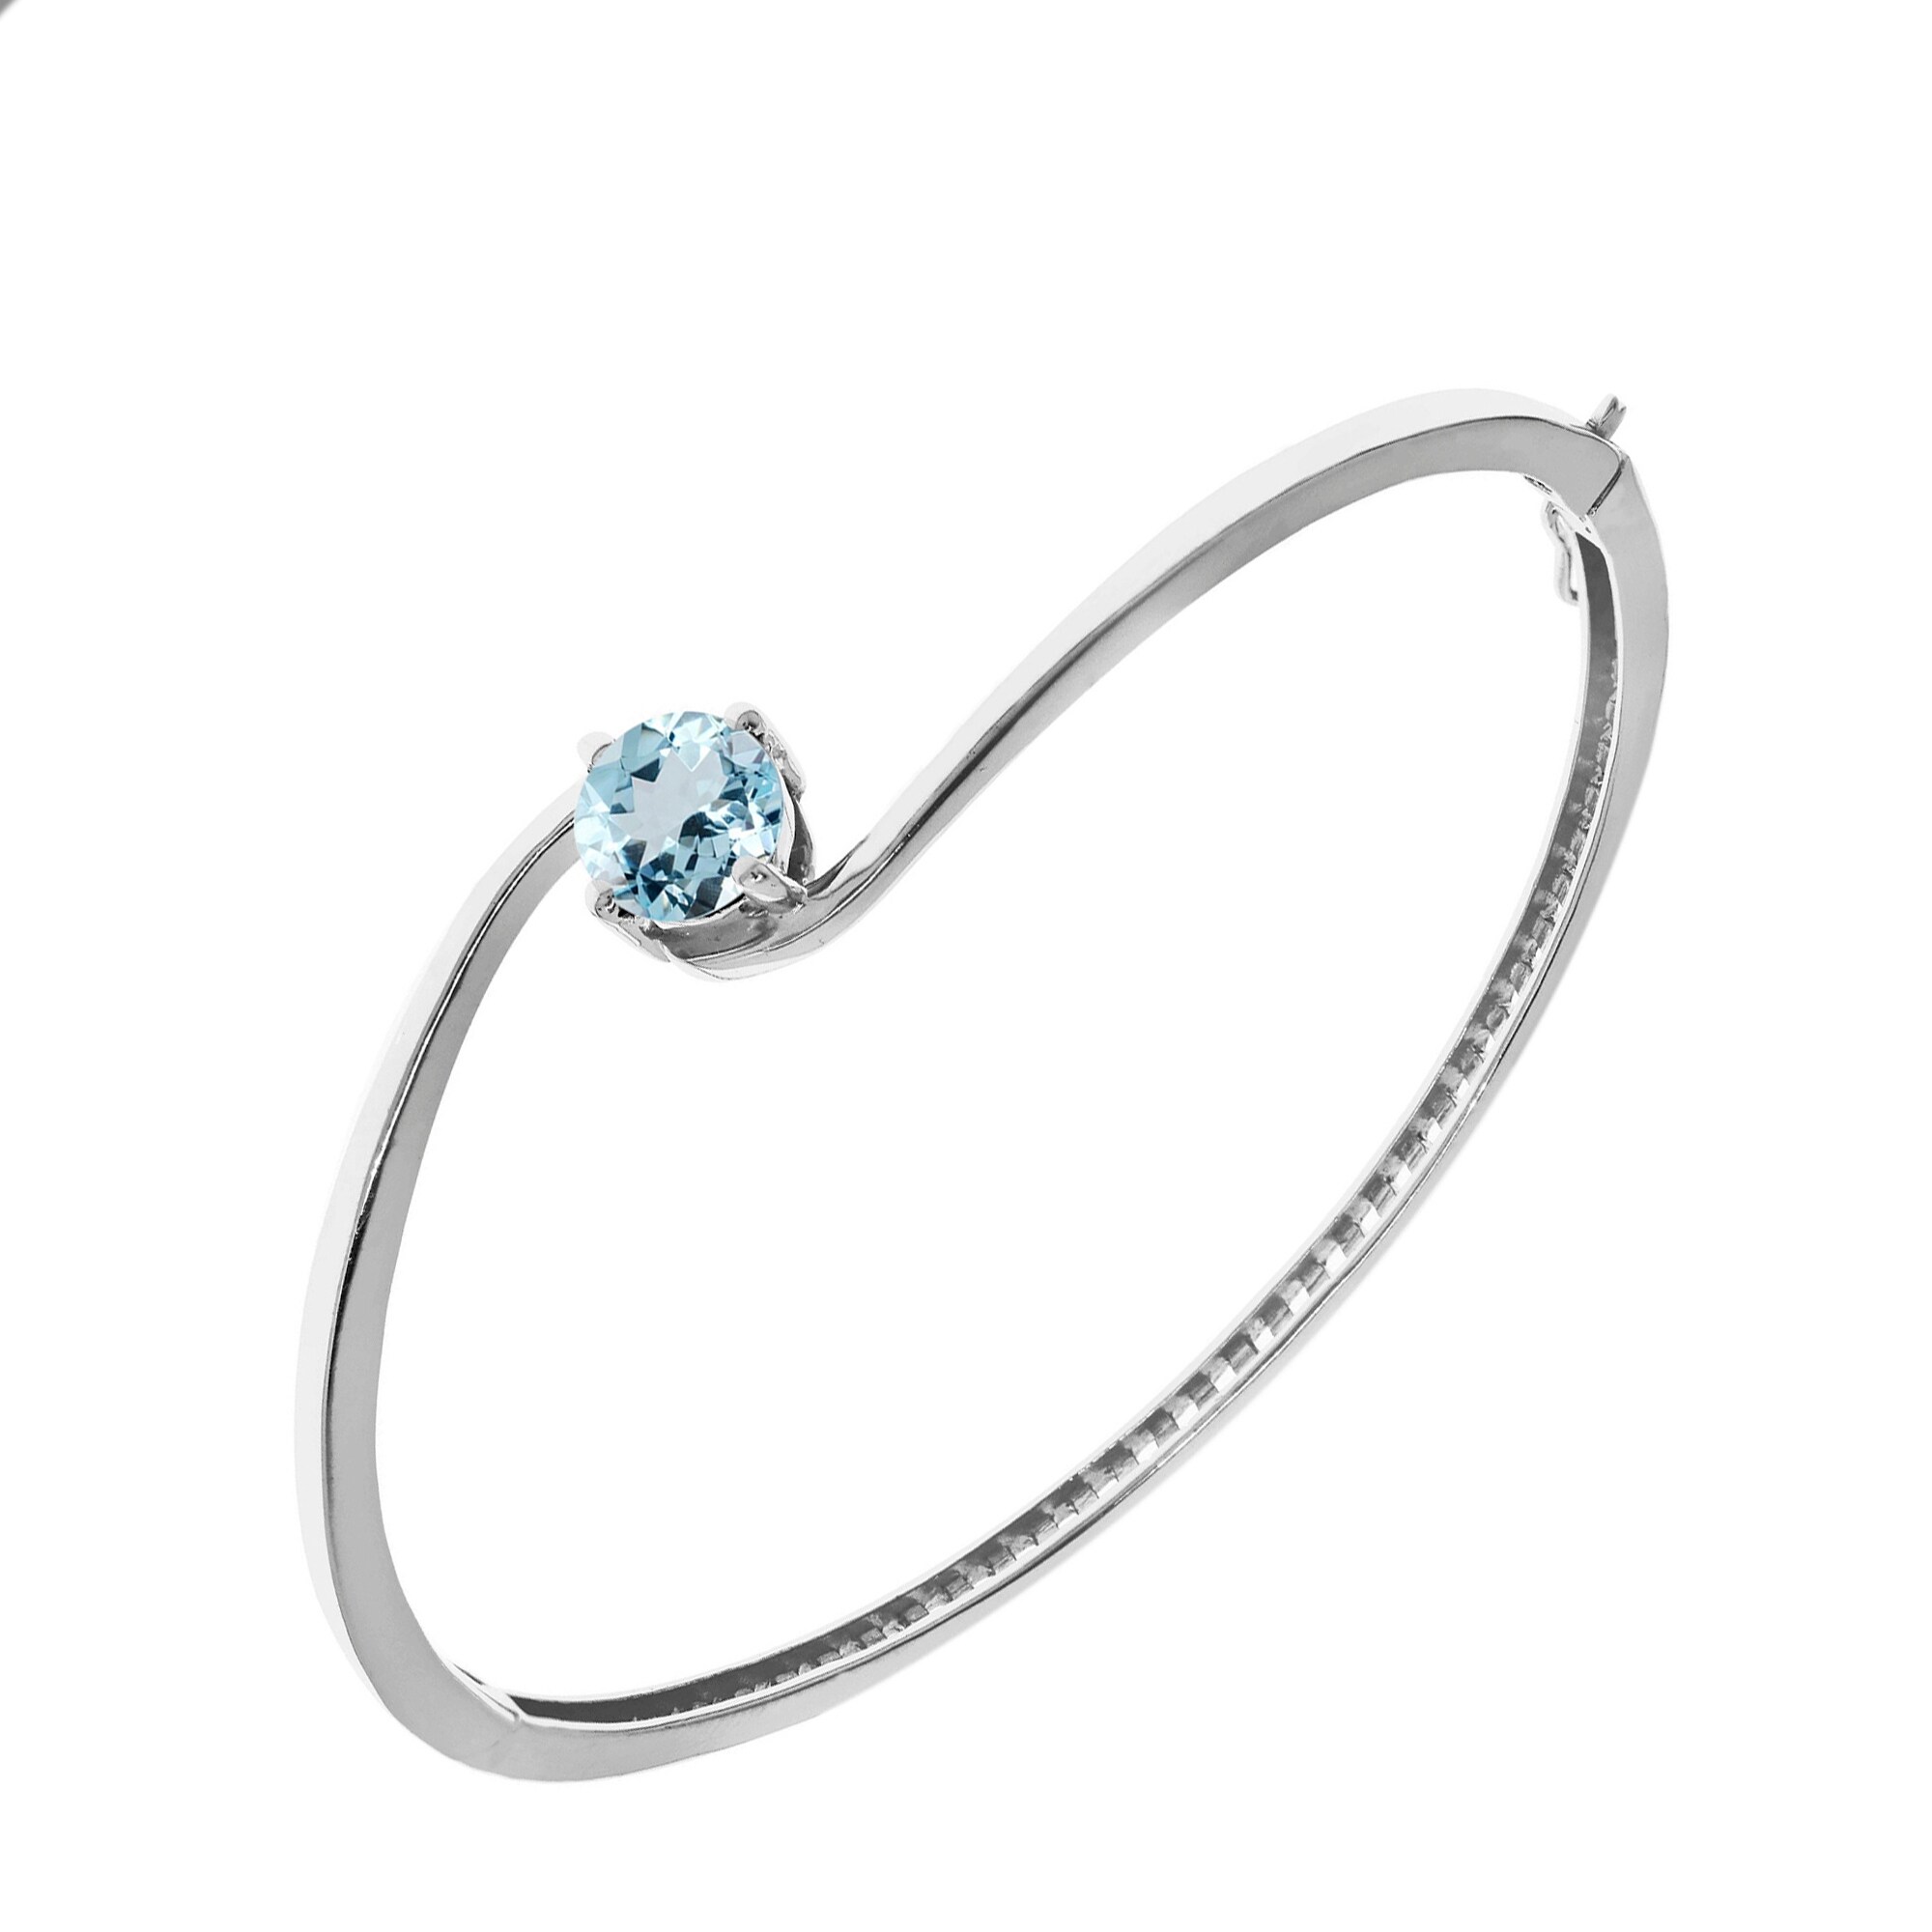 Sterling Silver with Aquamarine Solitaire Bangle Bracelet-7.25''